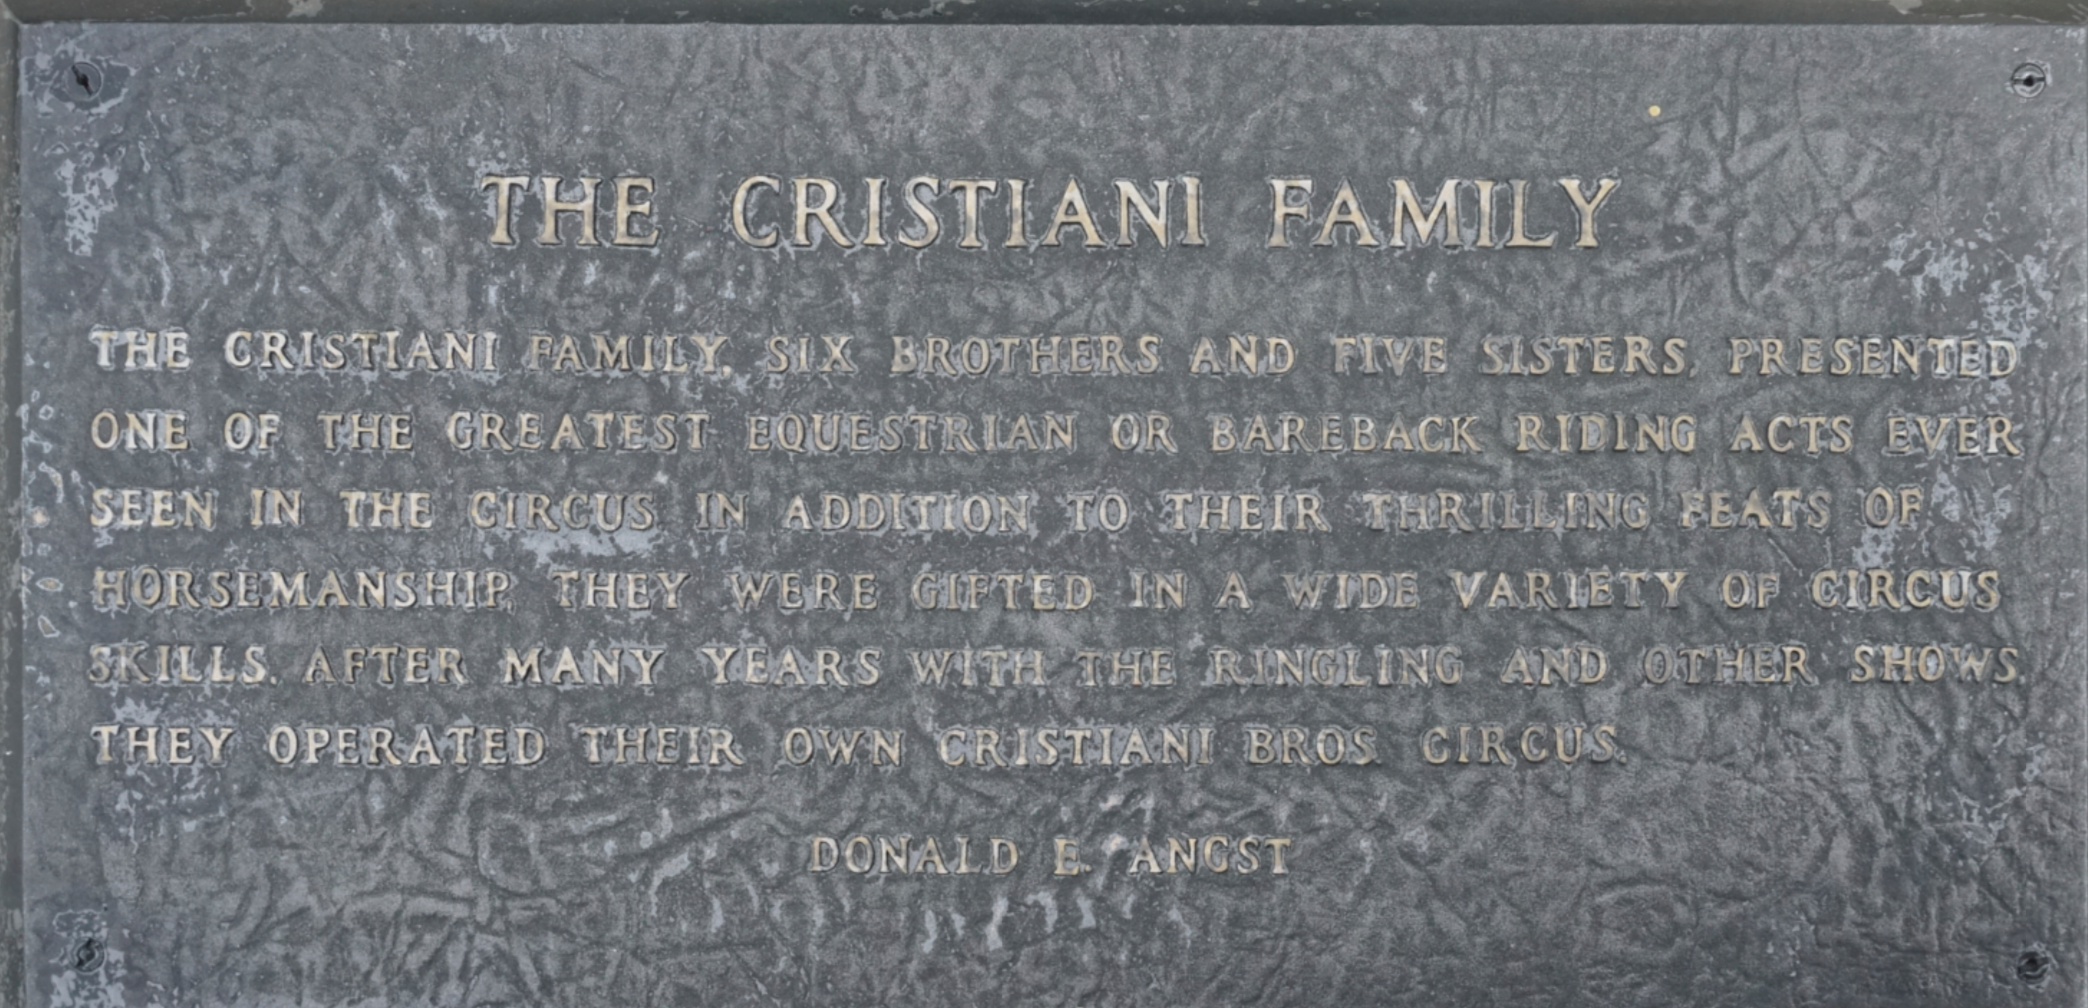 Cristiani Family Circus Ring Of Fame Foundation inductees plaque